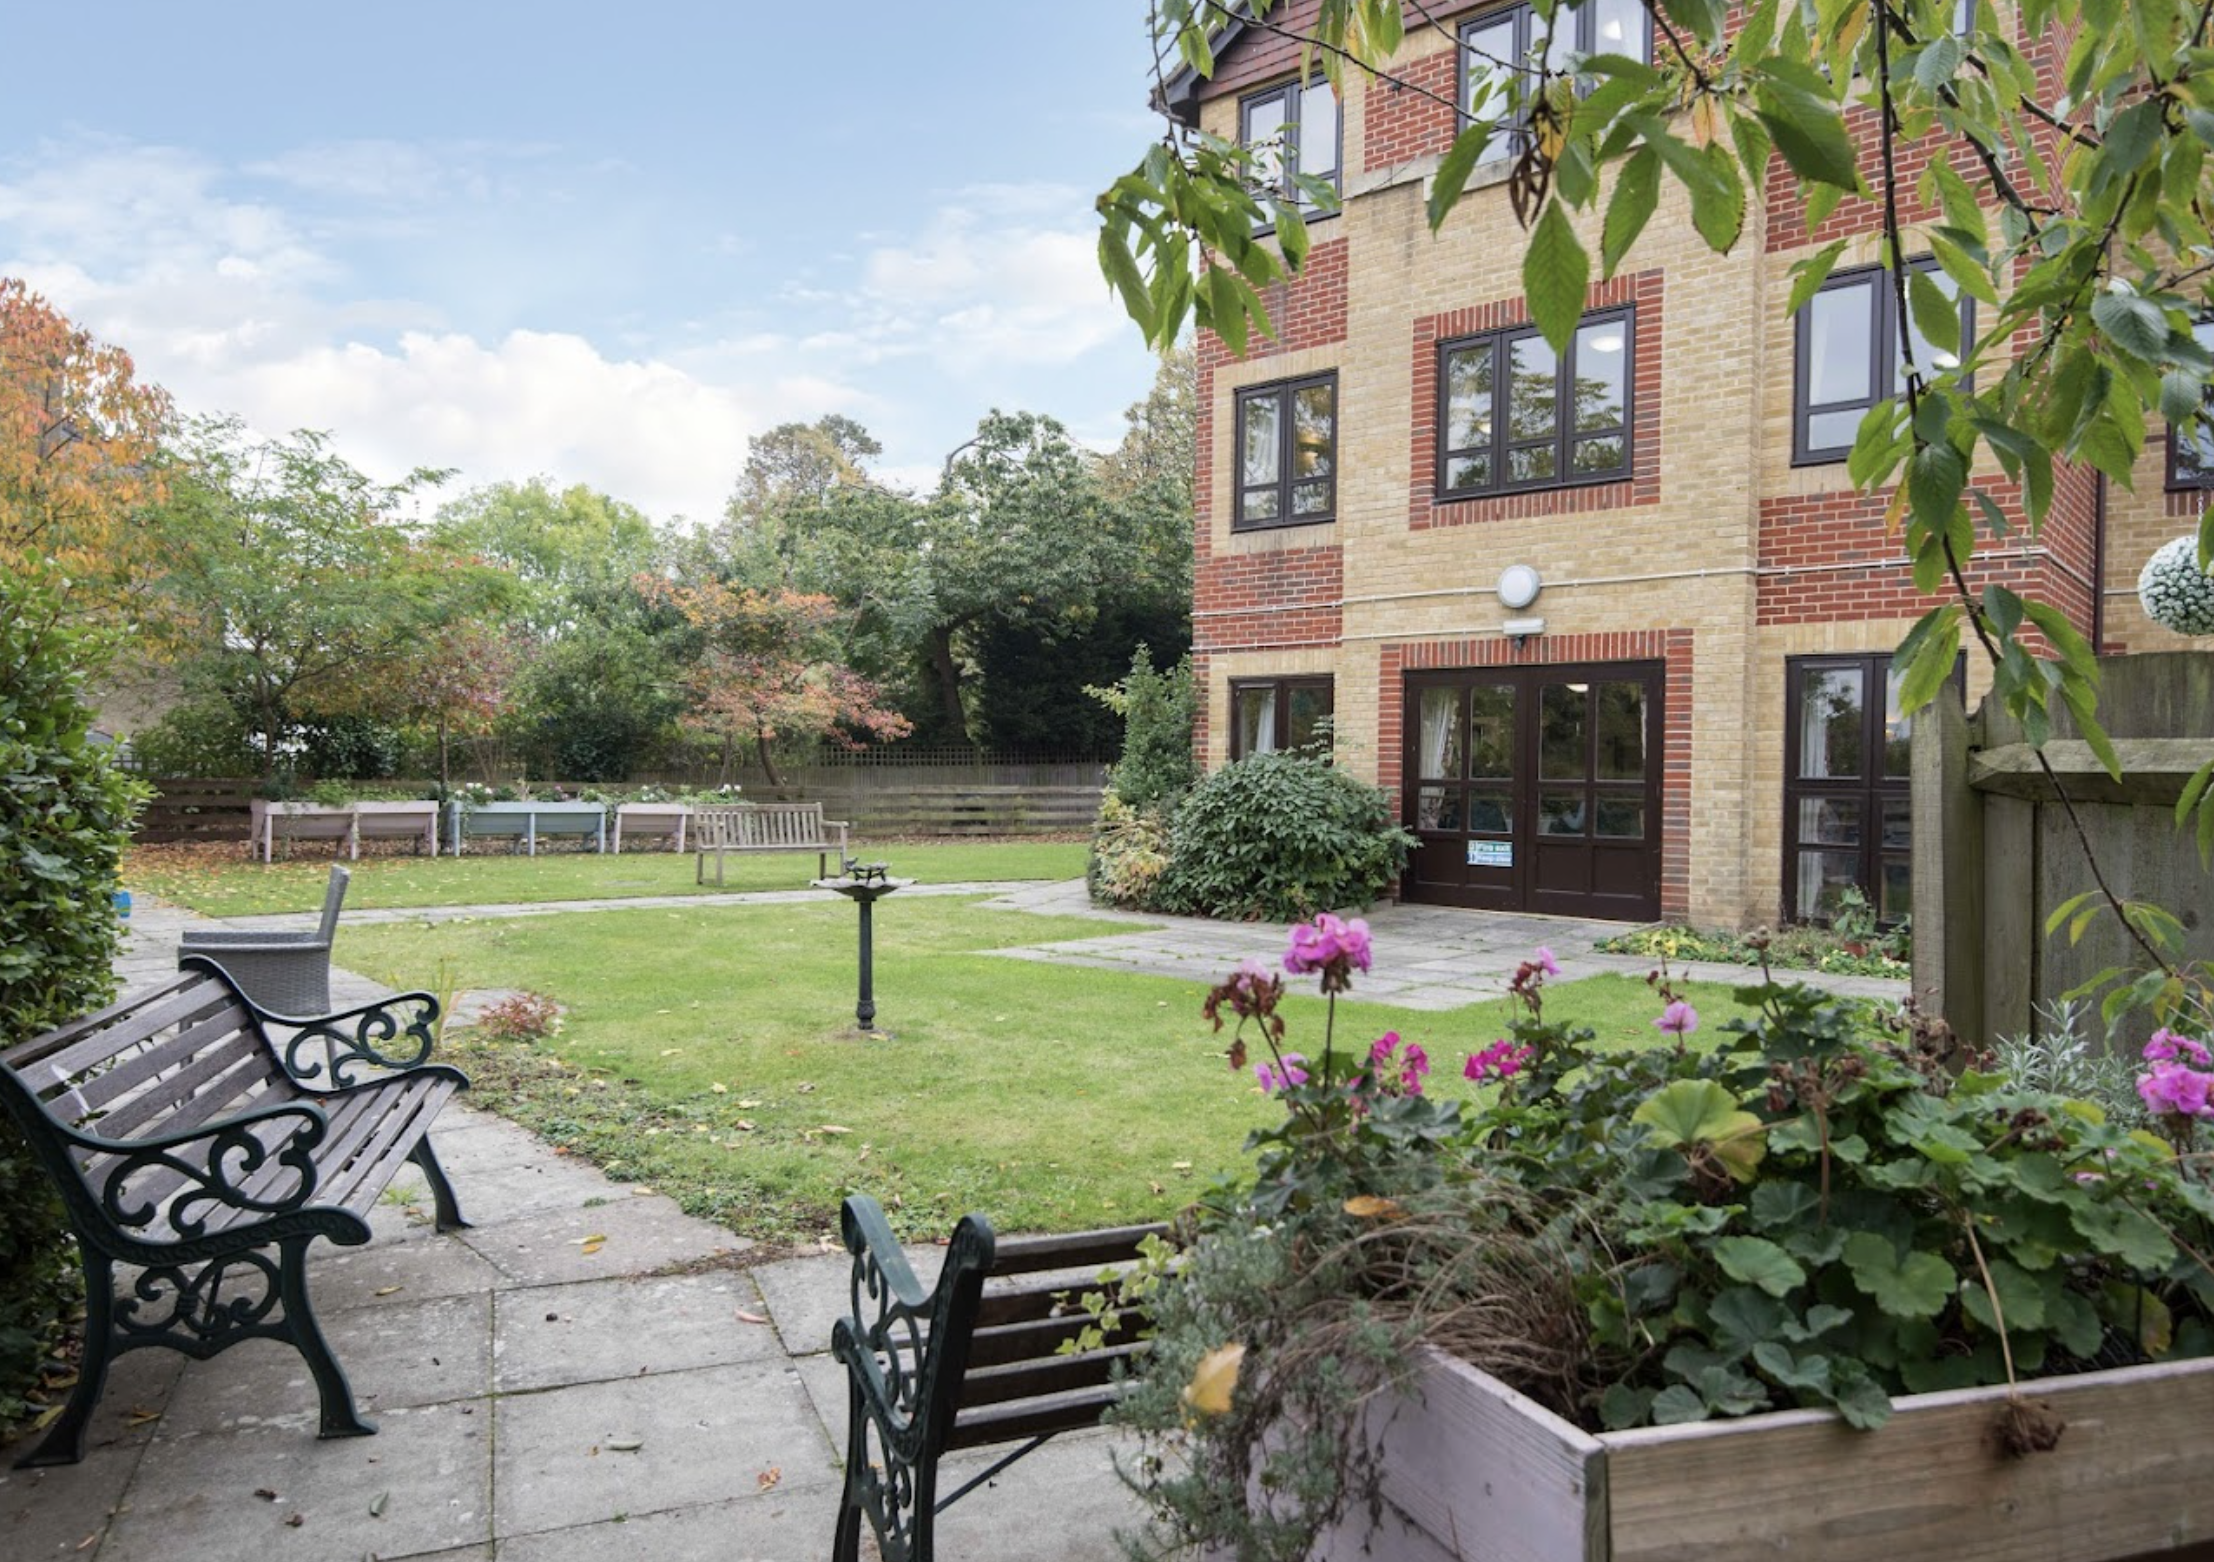 Garden of The Sidcup care home in Sidcup, Kent